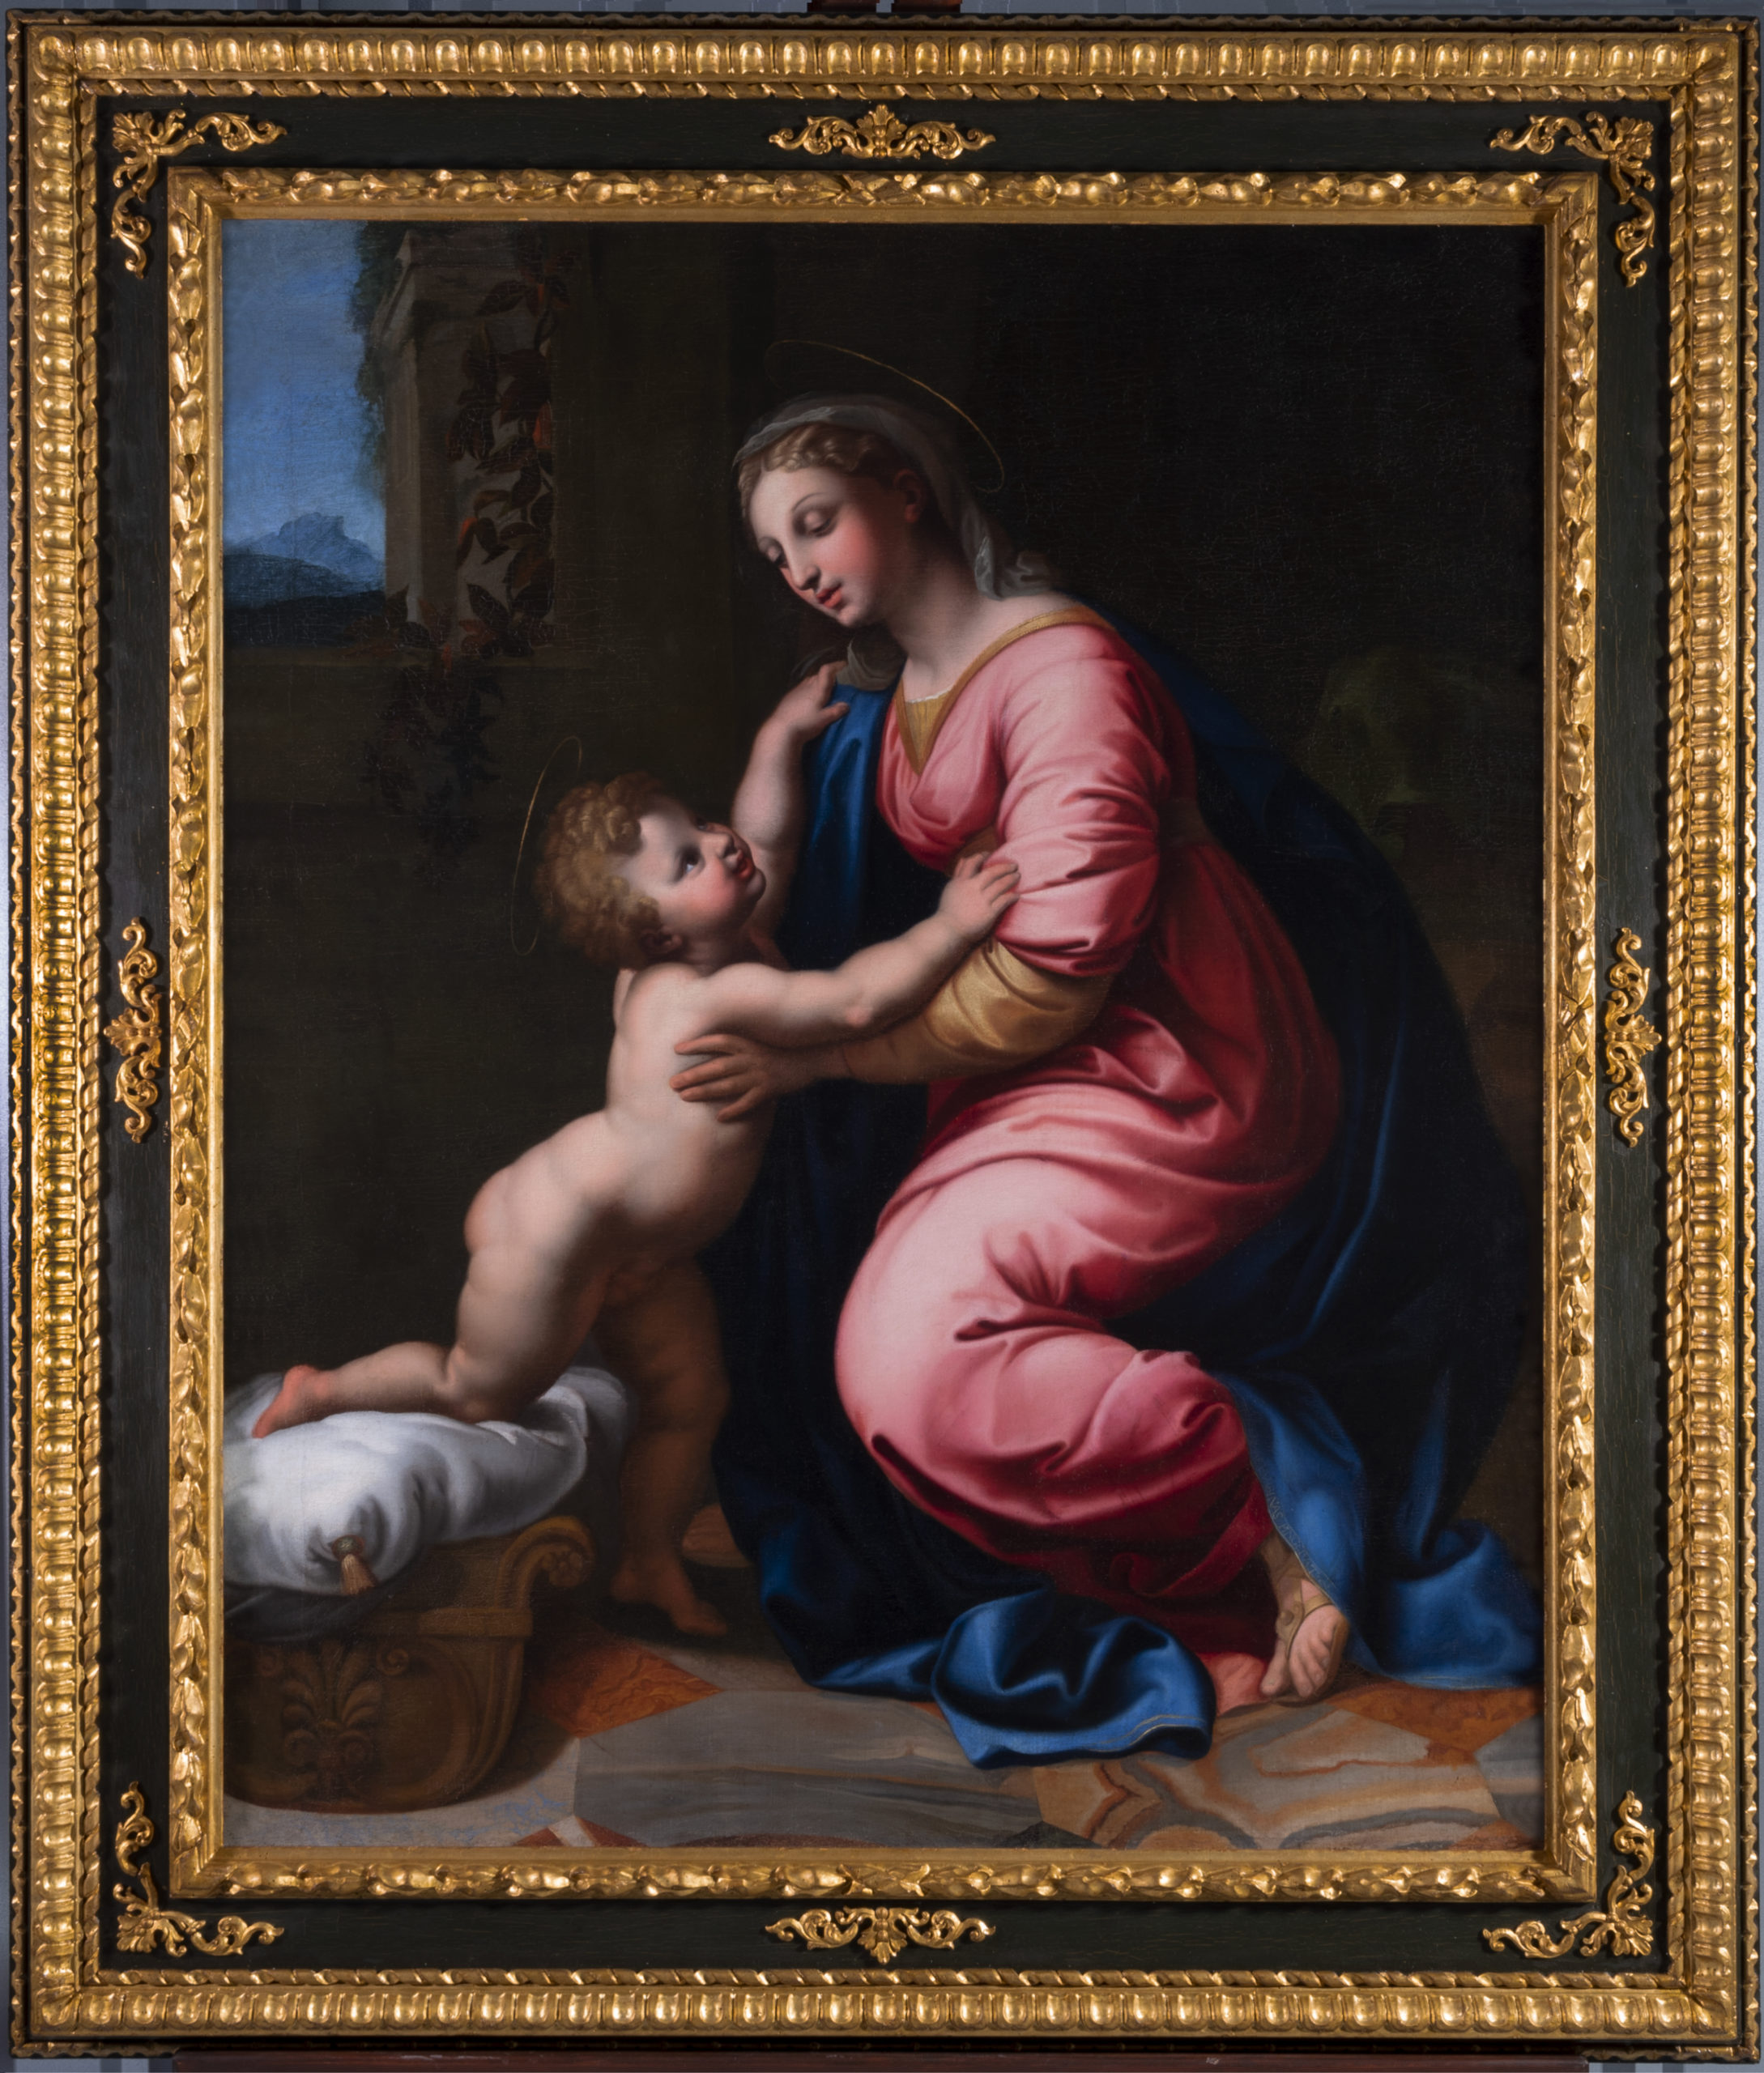 InsightART helped to analyse the lost Raphael’s painting - InsightART